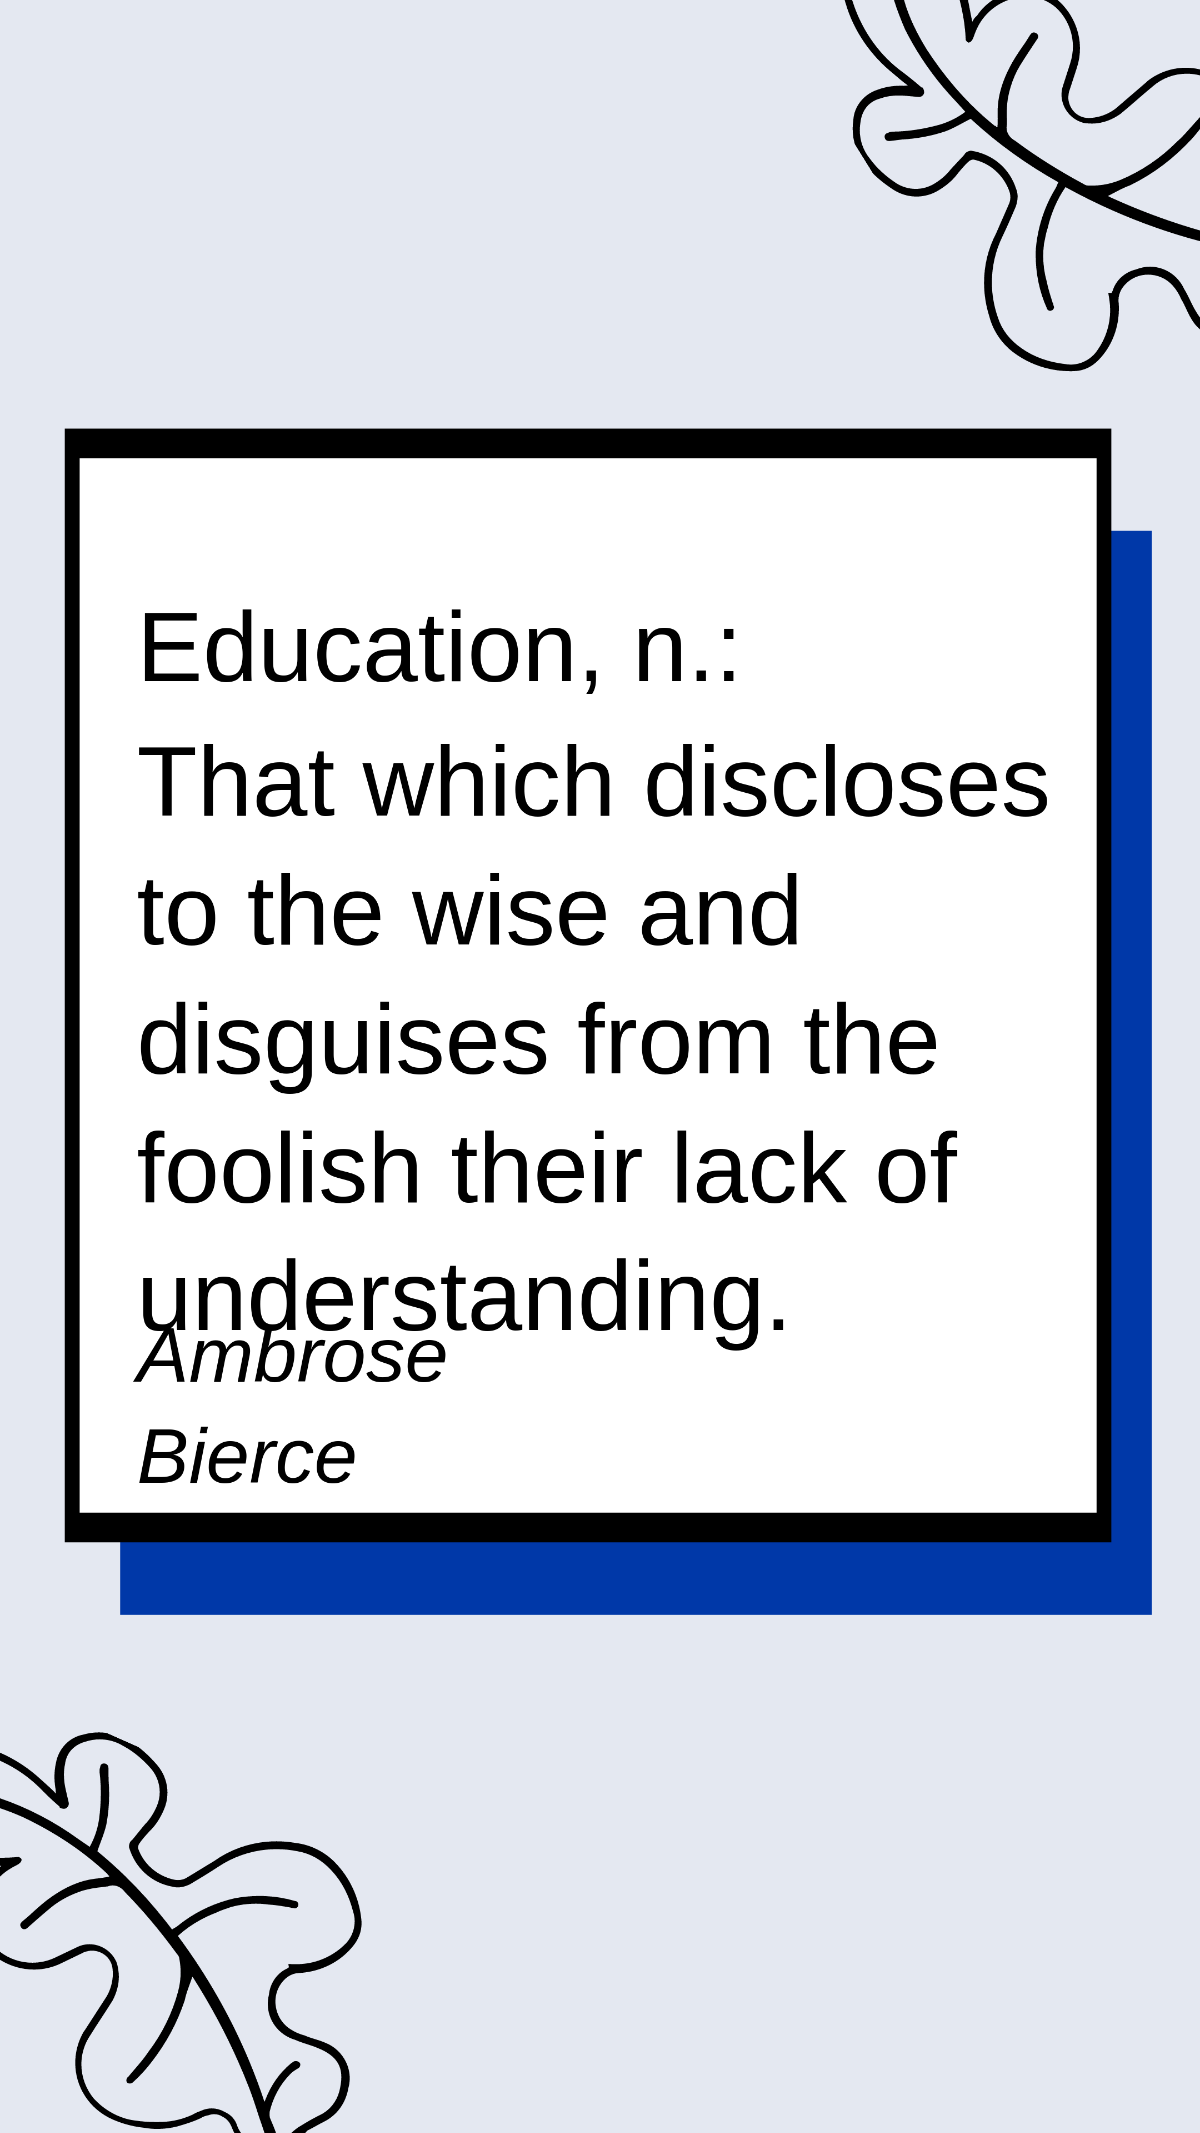 Ambrose Bierce - Education, n.: That which discloses to the wise and disguises from the foolish their lack of understanding.